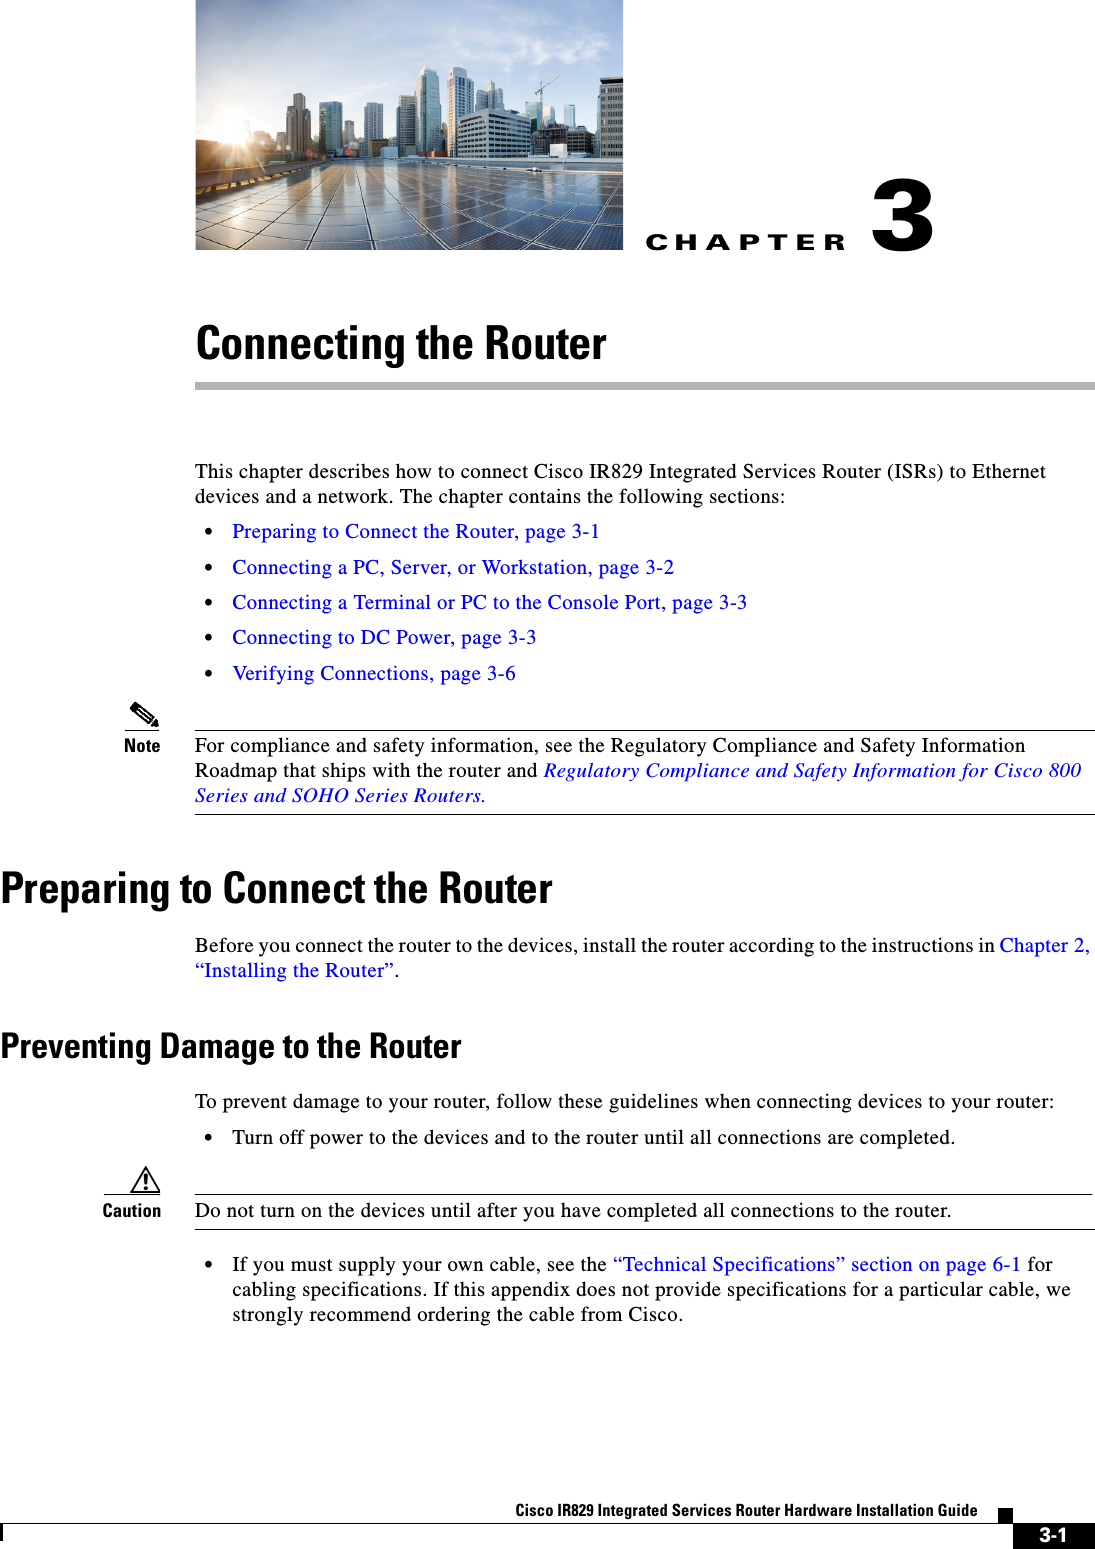 CHAPTER3-1Cisco IR829 Integrated Services Router Hardware Installation Guide3Connecting the RouterThis chapter describes how to connect Cisco IR829 Integrated Services Router (ISRs) to Ethernet devices and a network. The chapter contains the following sections:  • Preparing to Connect the Router, page 3-1  • Connecting a PC, Server, or Workstation, page 3-2  • Connecting a Terminal or PC to the Console Port, page 3-3  • Connecting to DC Power, page 3-3  • Verifying Connections, page 3-6Note For compliance and safety information, see the Regulatory Compliance and Safety Information Roadmap that ships with the router and Regulatory Compliance and Safety Information for Cisco 800 Series and SOHO Series Routers.Preparing to Connect the RouterBefore you connect the router to the devices, install the router according to the instructions in Chapter 2, “Installing the Router”.Preventing Damage to the RouterTo prevent damage to your router, follow these guidelines when connecting devices to your router:  • Turn off power to the devices and to the router until all connections are completed.Caution Do not turn on the devices until after you have completed all connections to the router.  • If you must supply your own cable, see the “Technical Specifications” section on page 6-1 for cabling specifications. If this appendix does not provide specifications for a particular cable, we strongly recommend ordering the cable from Cisco.